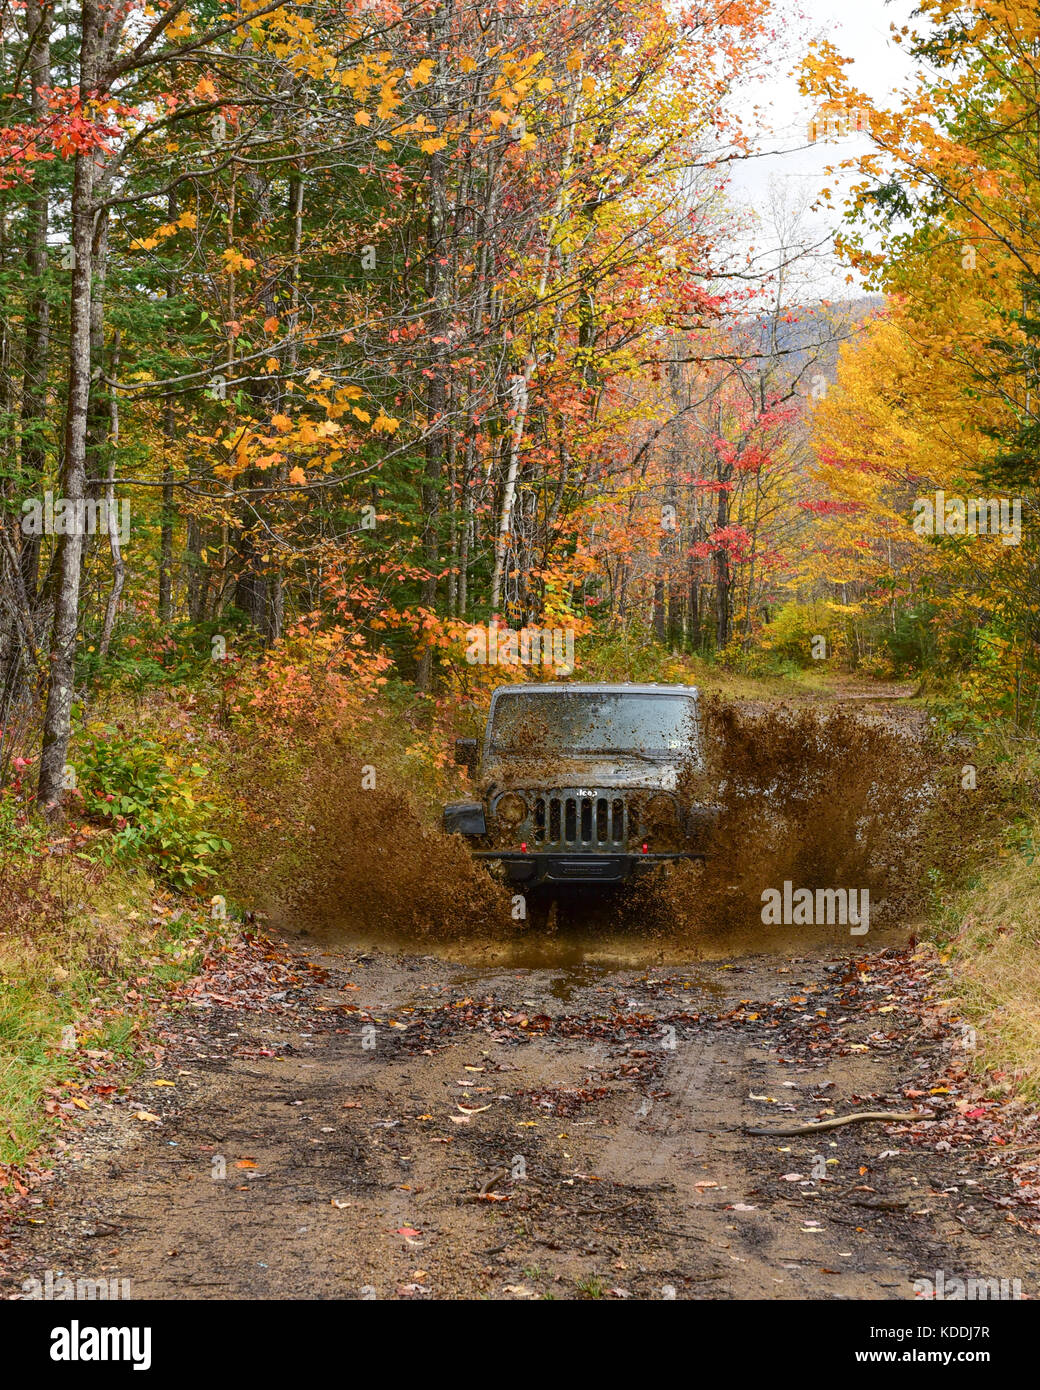 A Jeep Wrangler Rubicon charging through a water and mud hole in the Adirondack wilderness in autumn. Stock Photo